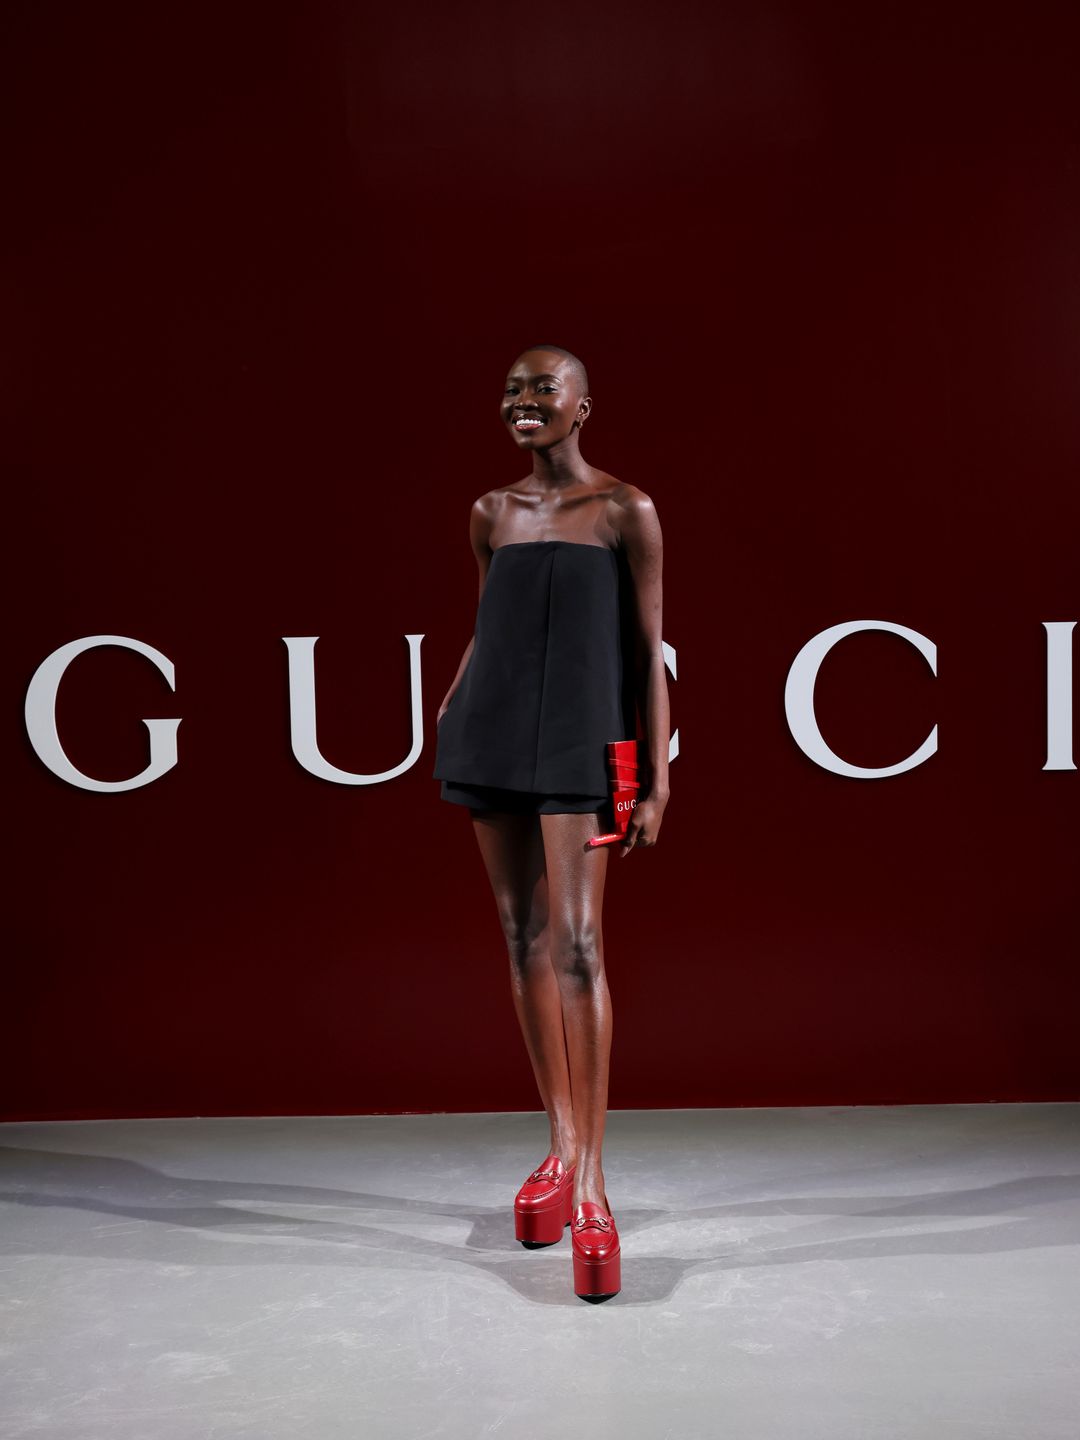 Amina Sek donned a LBD and red platform heels to attend the Gucci show.